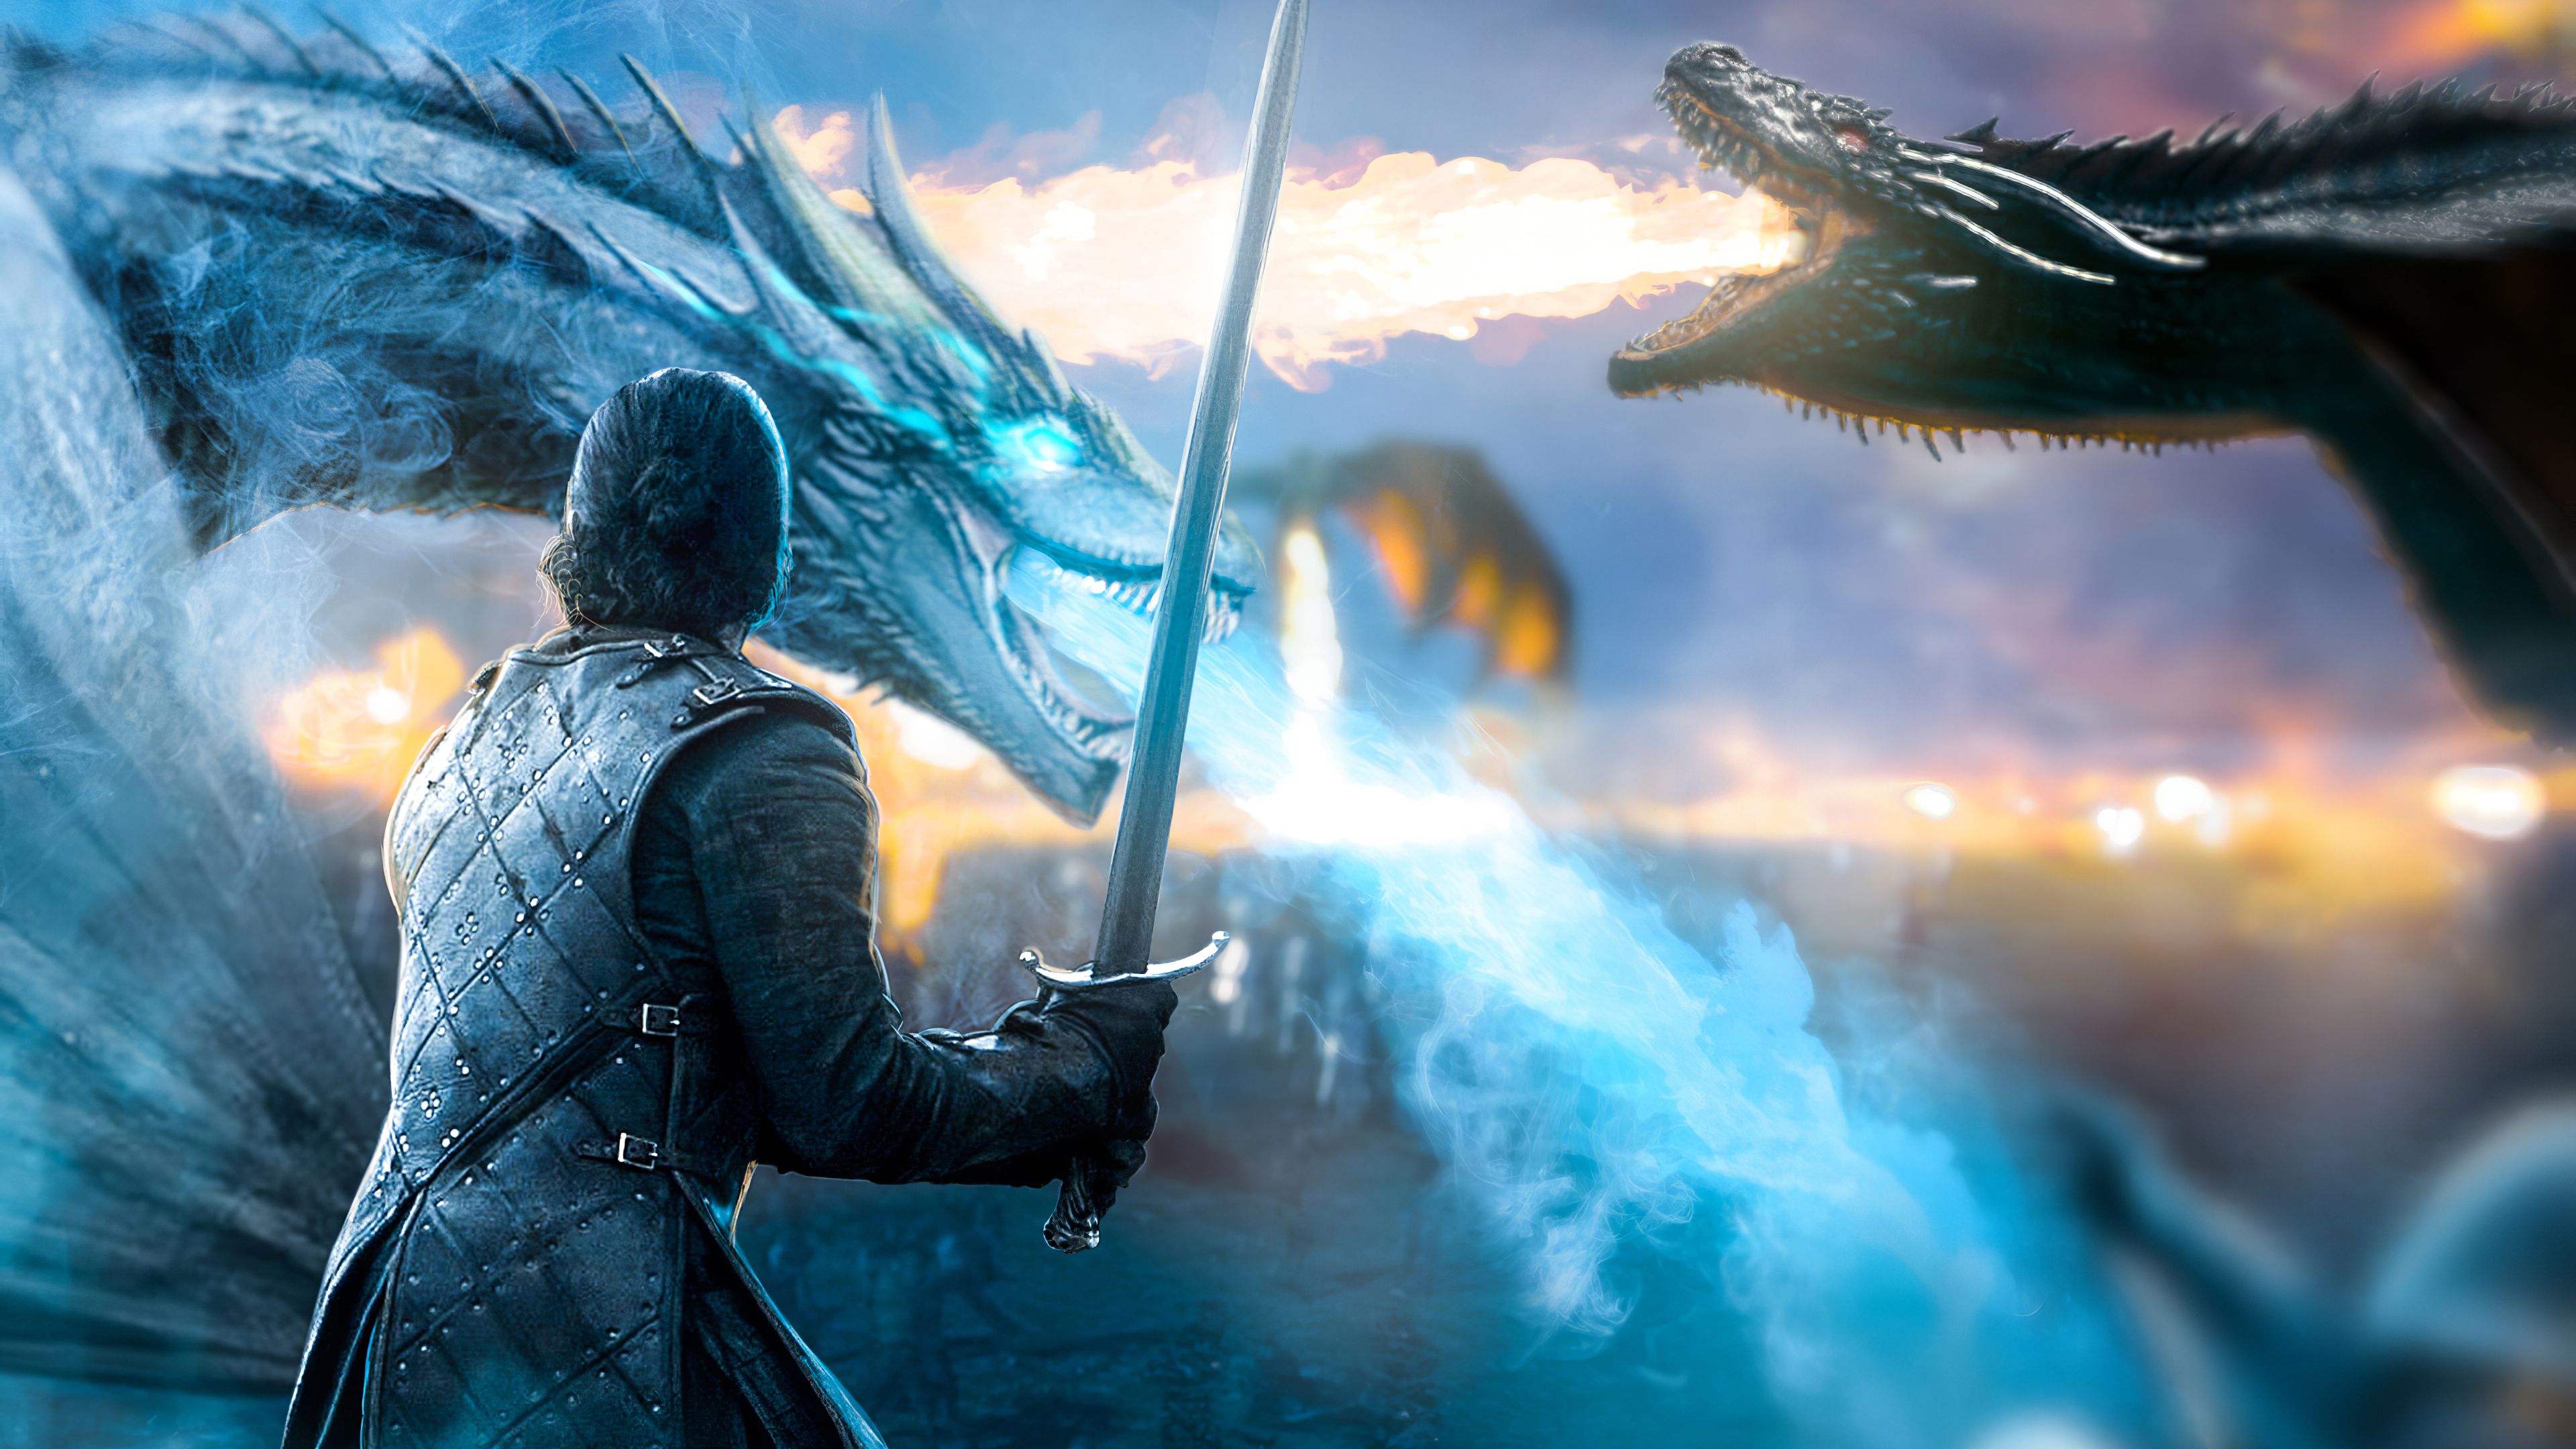 Game Of Thrones Dragons Wallpapers Wallpaper Cave